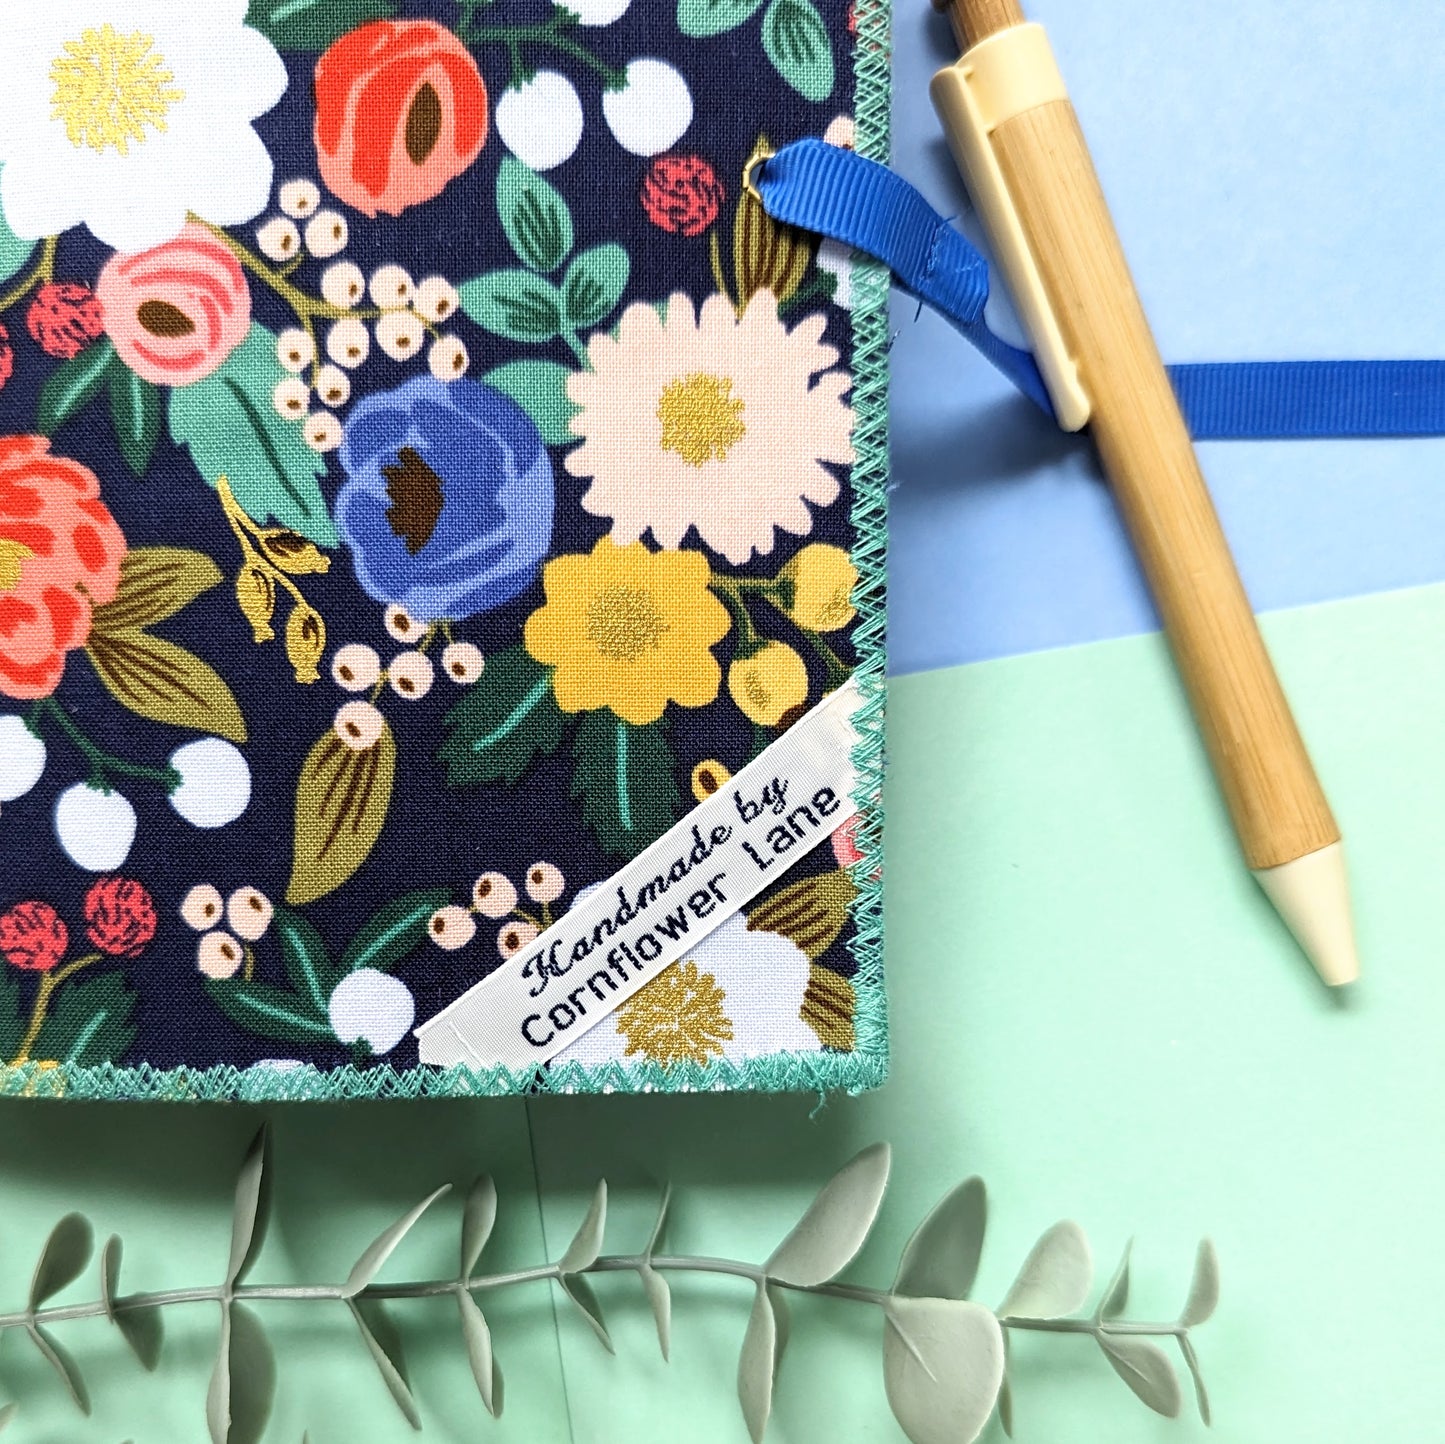 Handmade Rifle Paper Co Fabric Cover Journal